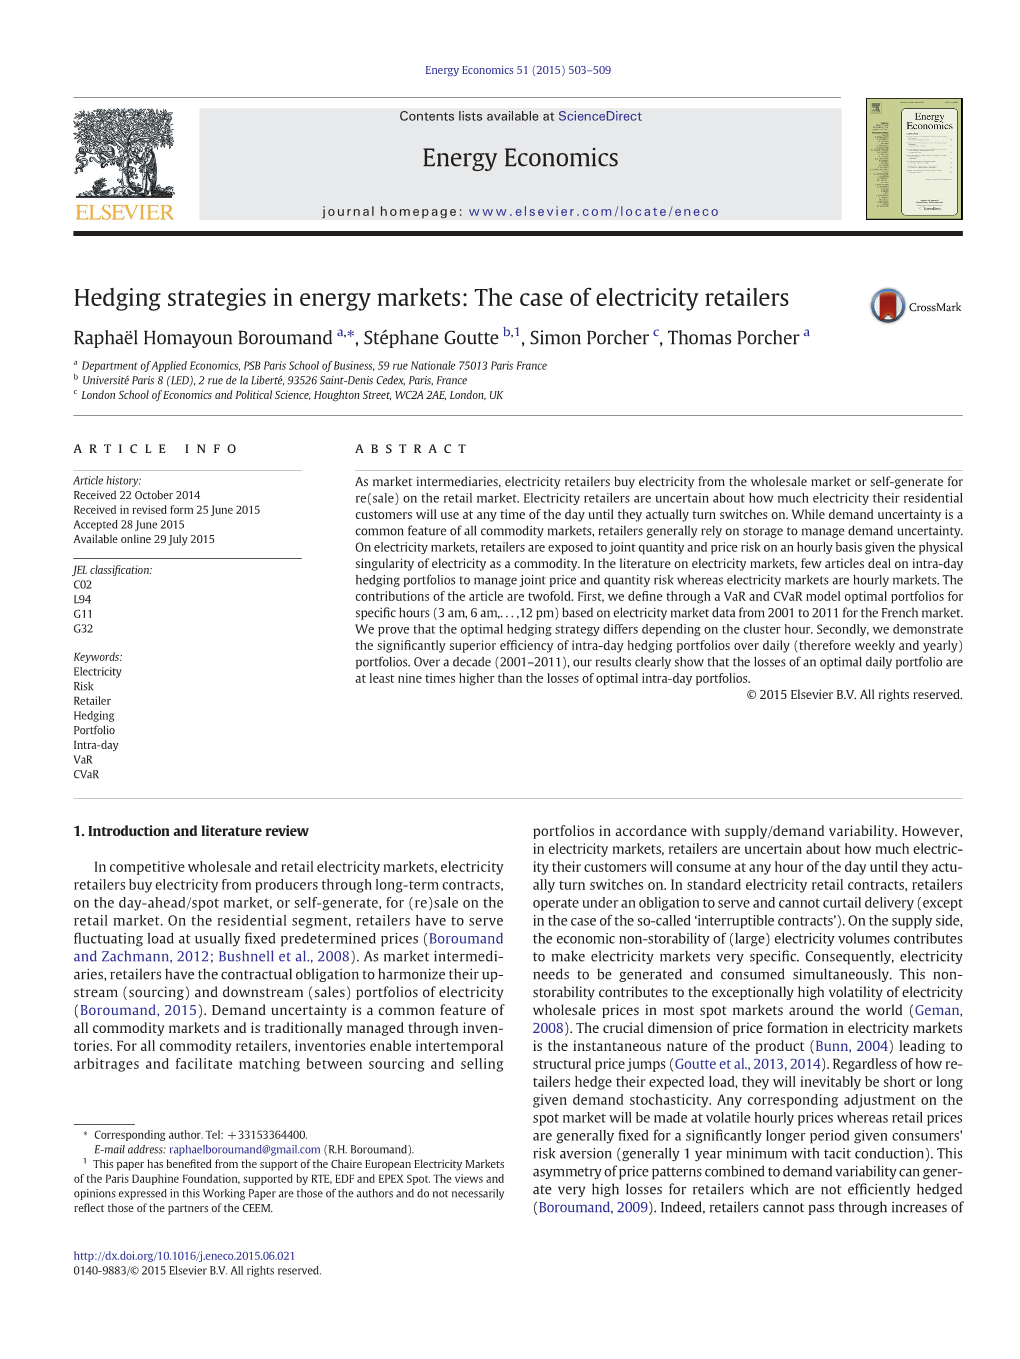 Hedging Strategies in Energy Markets: the Case of Electricity Retailers